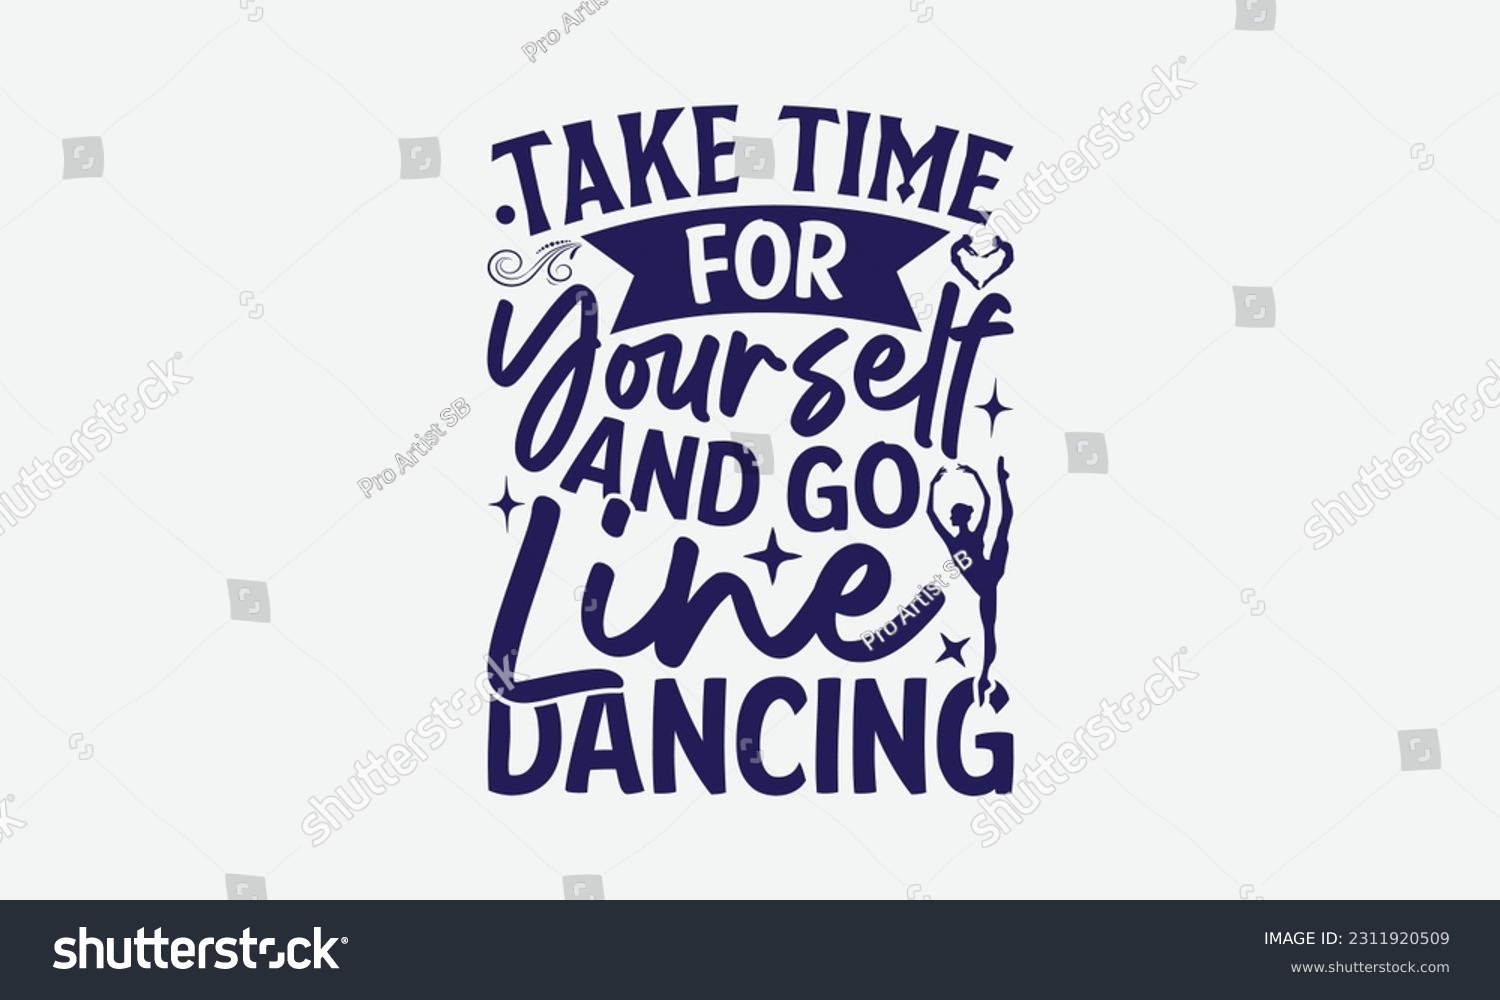 SVG of Take Time For Yourself And Go Line Dancing - Dancing SVG Design, Dance Quotes, Hand Drawn Vintage Hand Lettering, Poster Vector Design Template, and EPS 10. svg